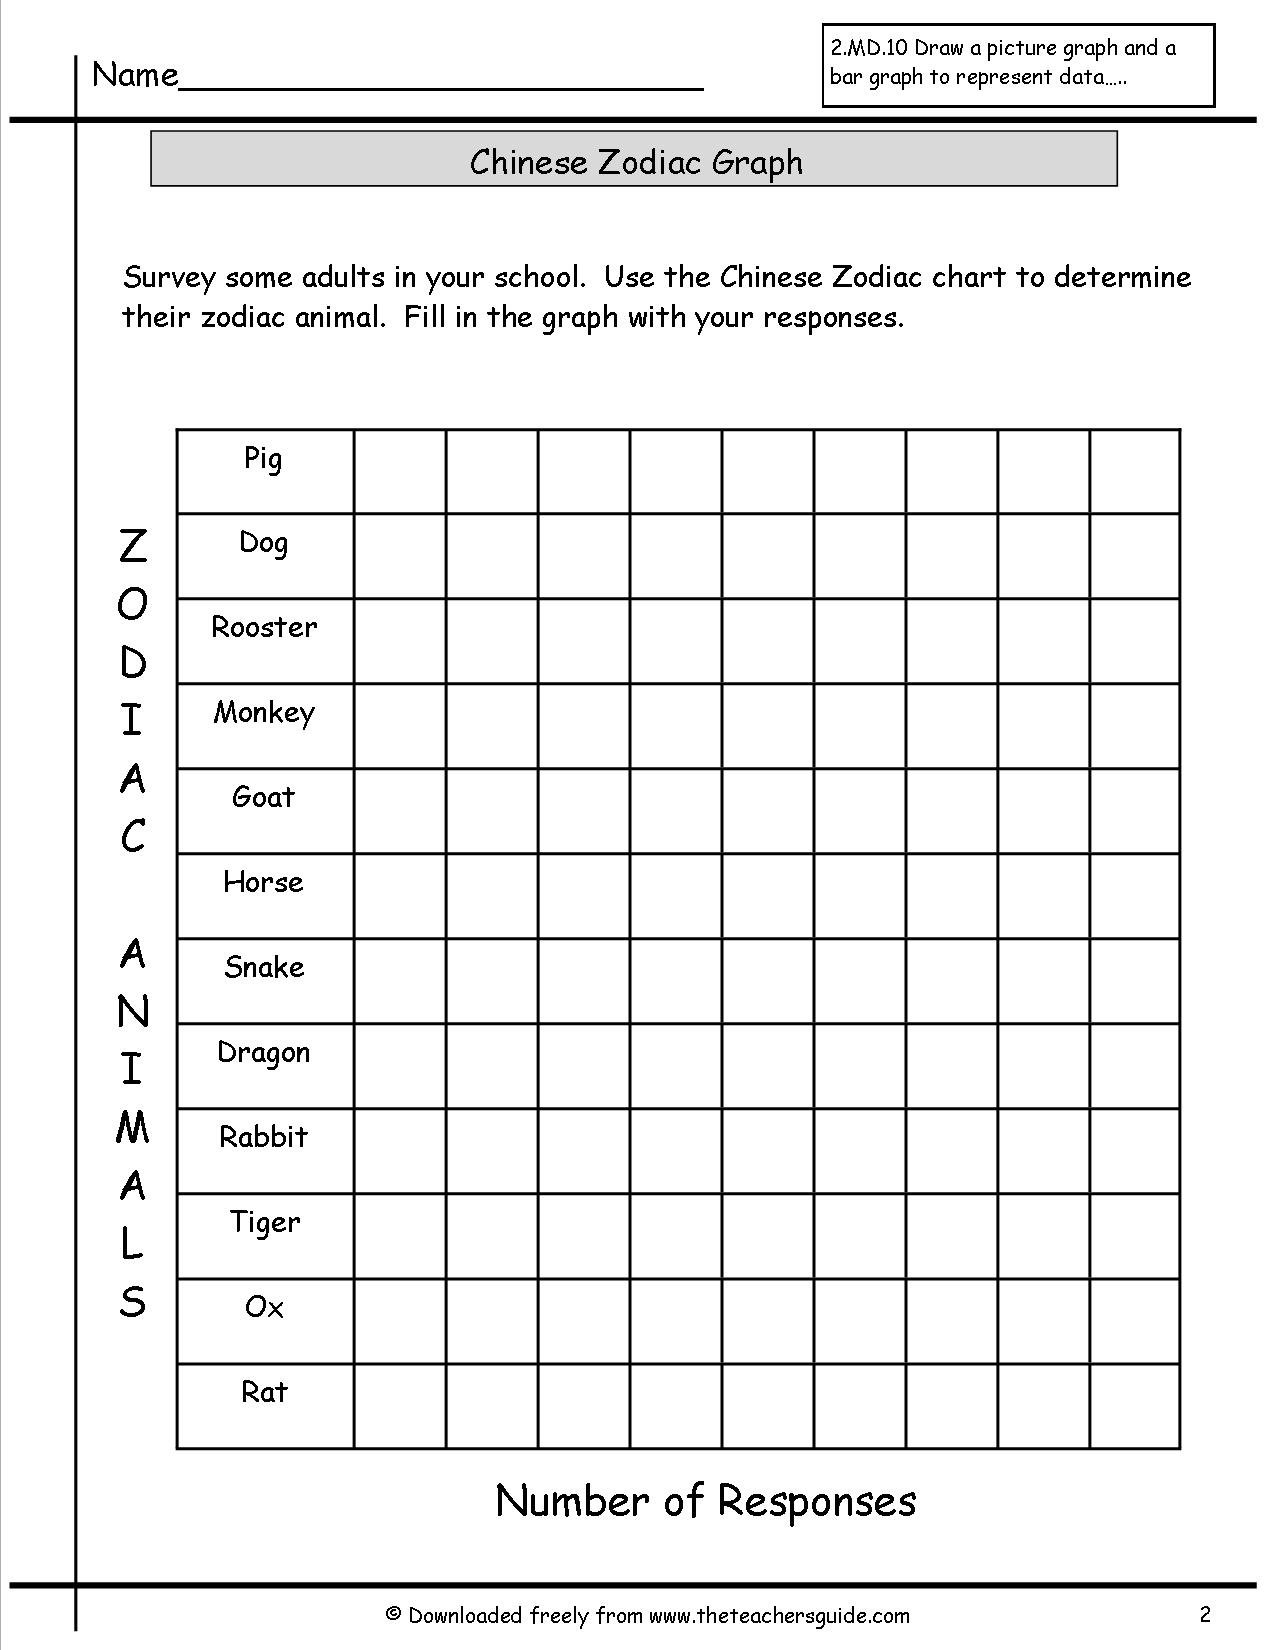 Reading And Creating Bar Graphs Worksheets From The Teacher's Guide Inside Reading Graphs Worksheets